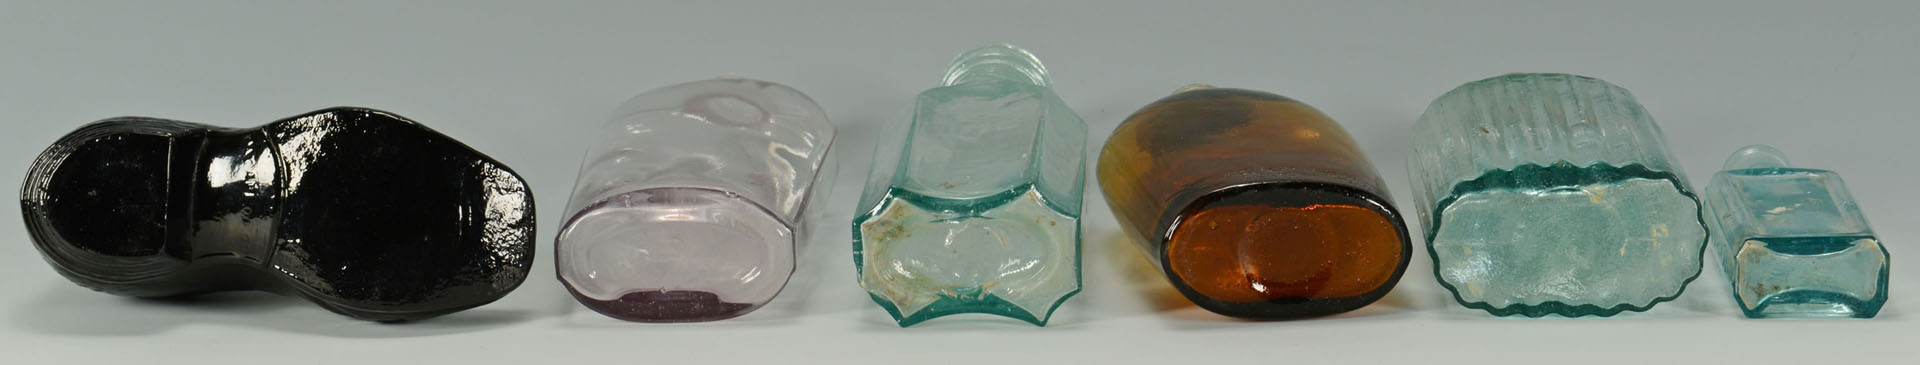 Lot 532: Group of Early Glass Bottles, total 12